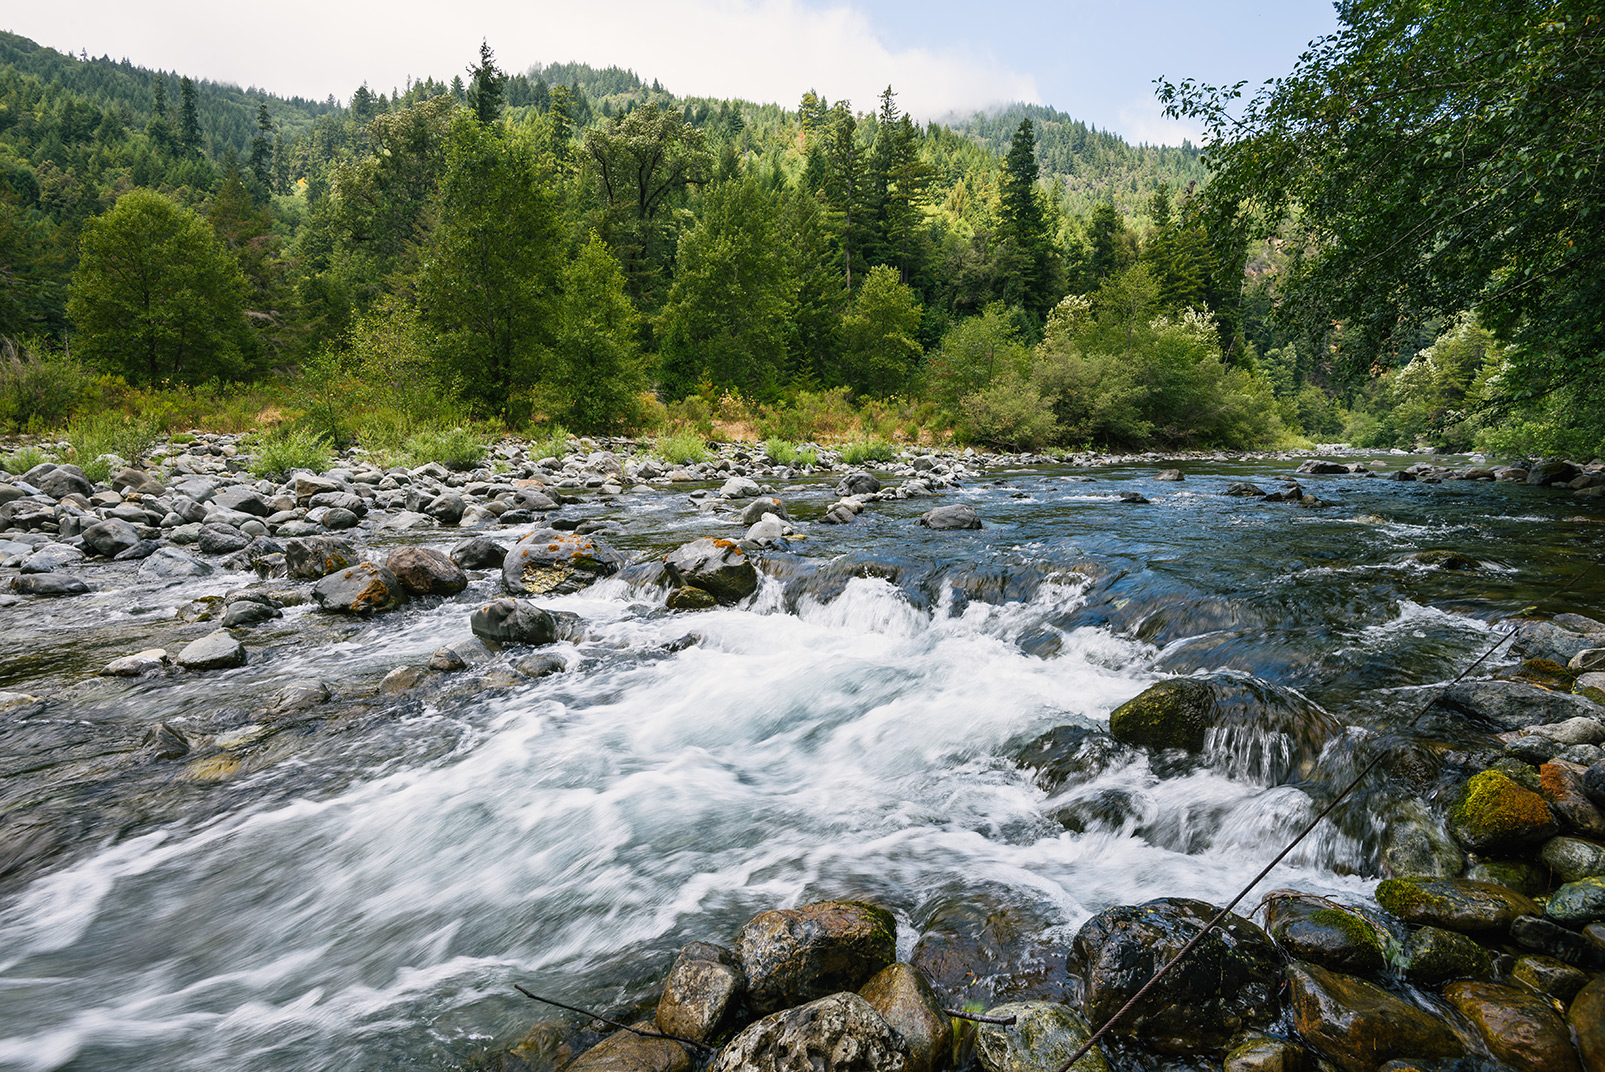 Blue Creek is a tributary to the Klamath River and a major salmon-spawning ground in Yurok Territory. Restoring the forest along the creek helps protect that spawning area as well as the Klamath itself, which is integral to the Yurok culture. Photo © Kevin Arnold